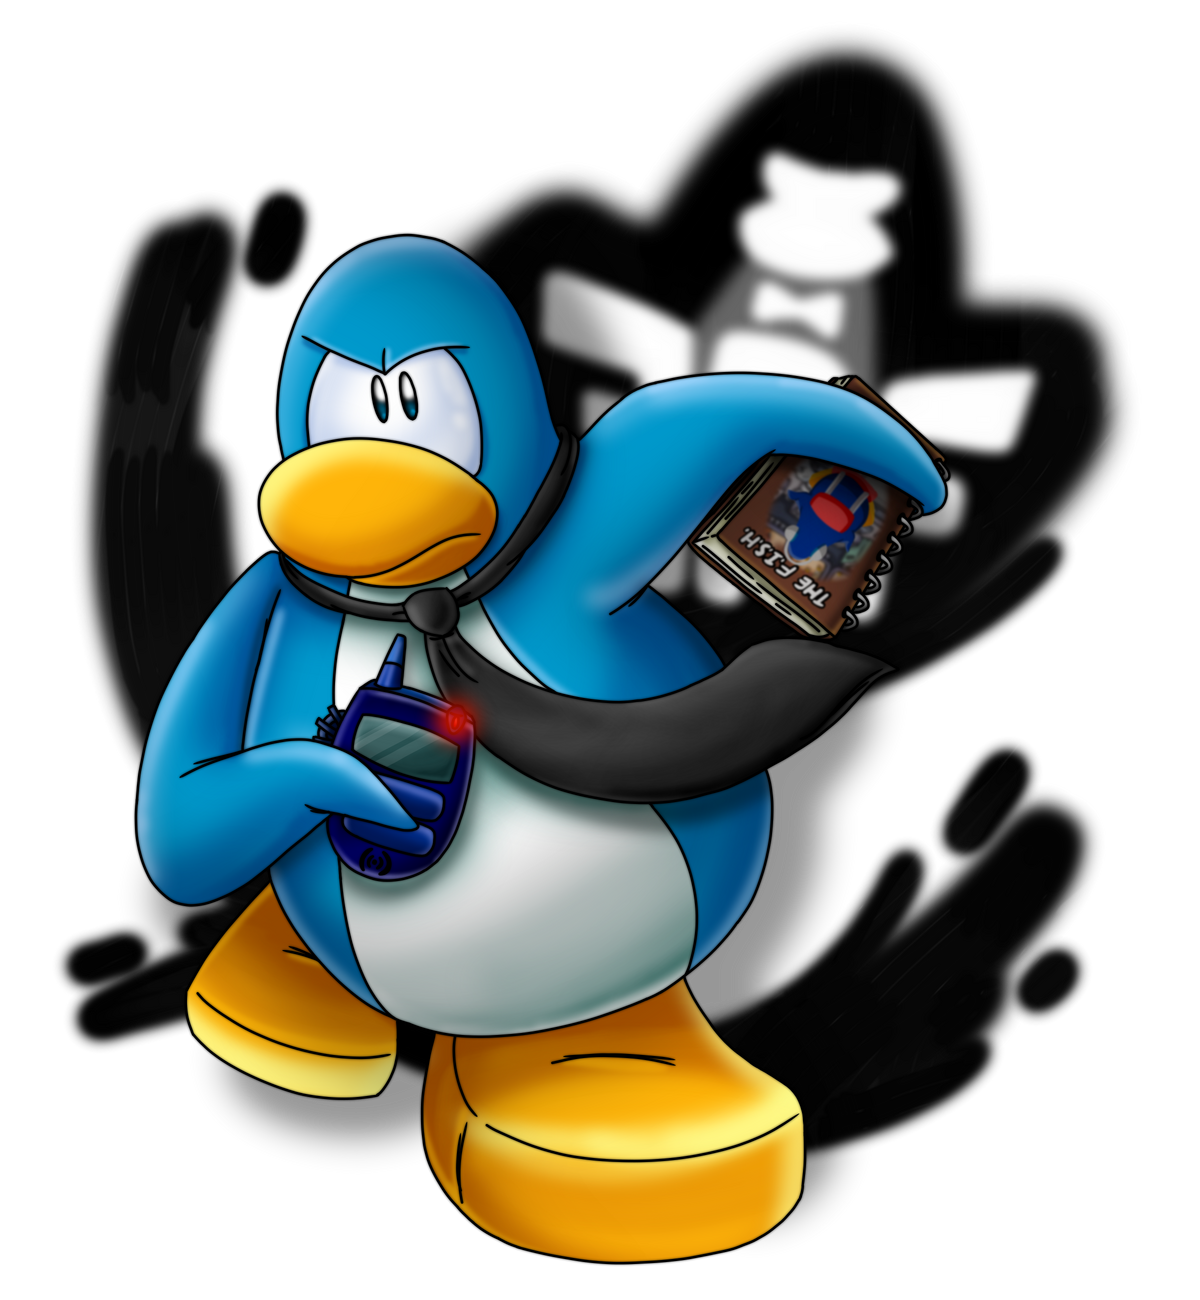 Penguin Cup Rooms and Items  Loo978's Club Penguin Cheats